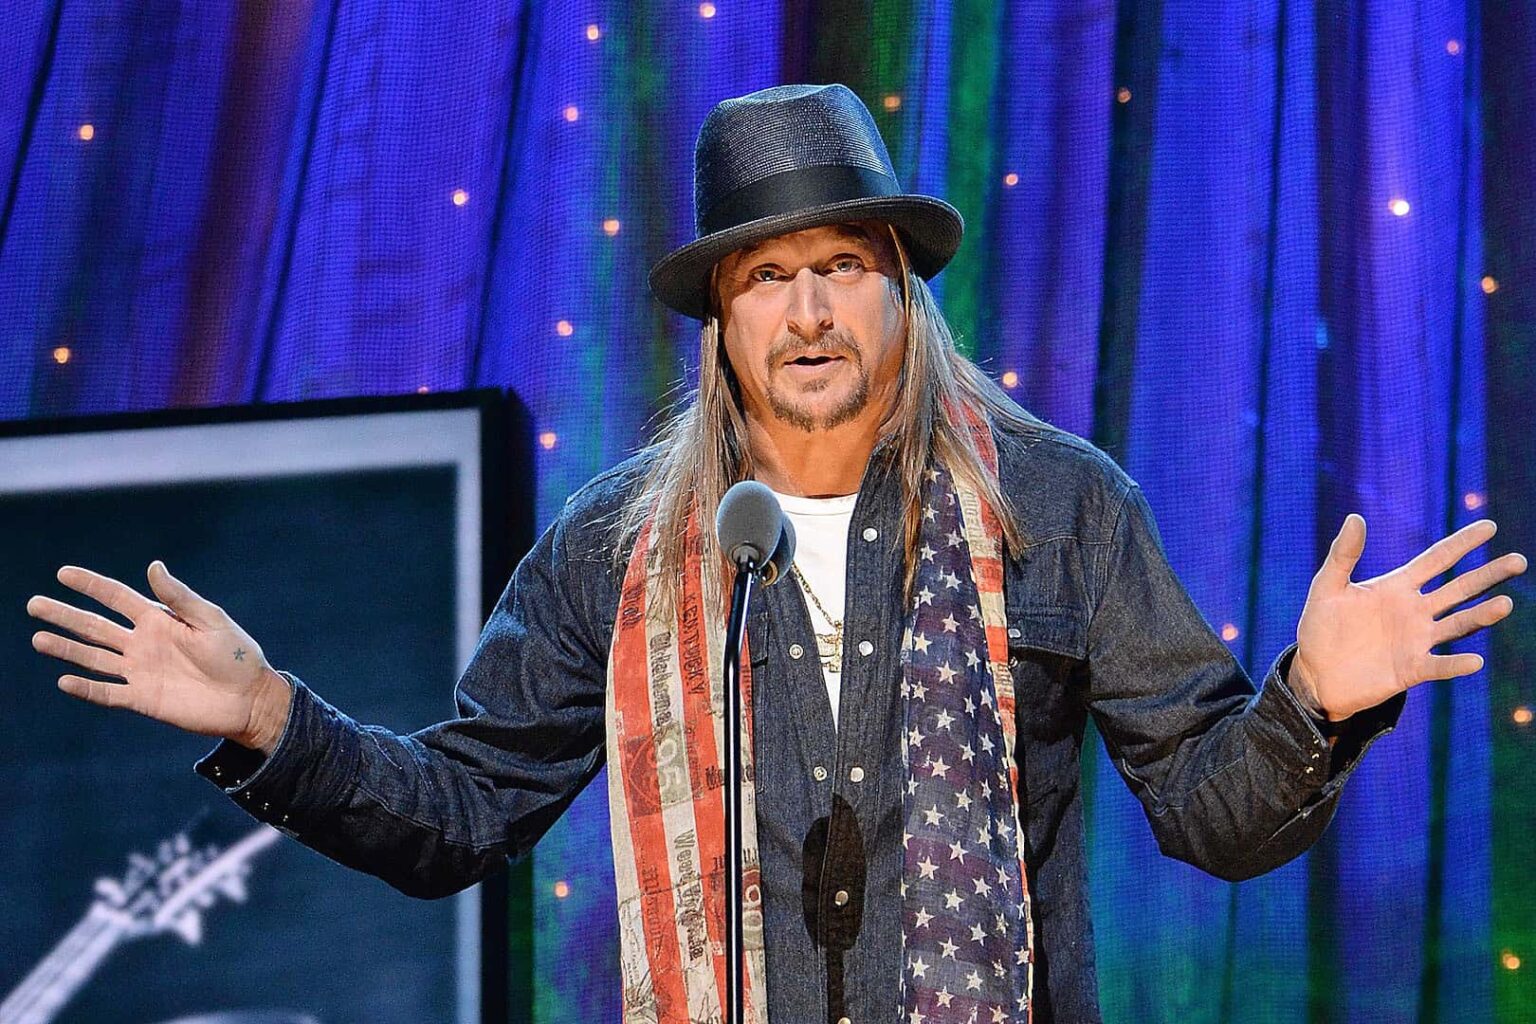 If you've seen any videos from a Kid Rock concert, then you know he's likely to misbehave in them. Brace yourself for the rocker's latest non-apology.